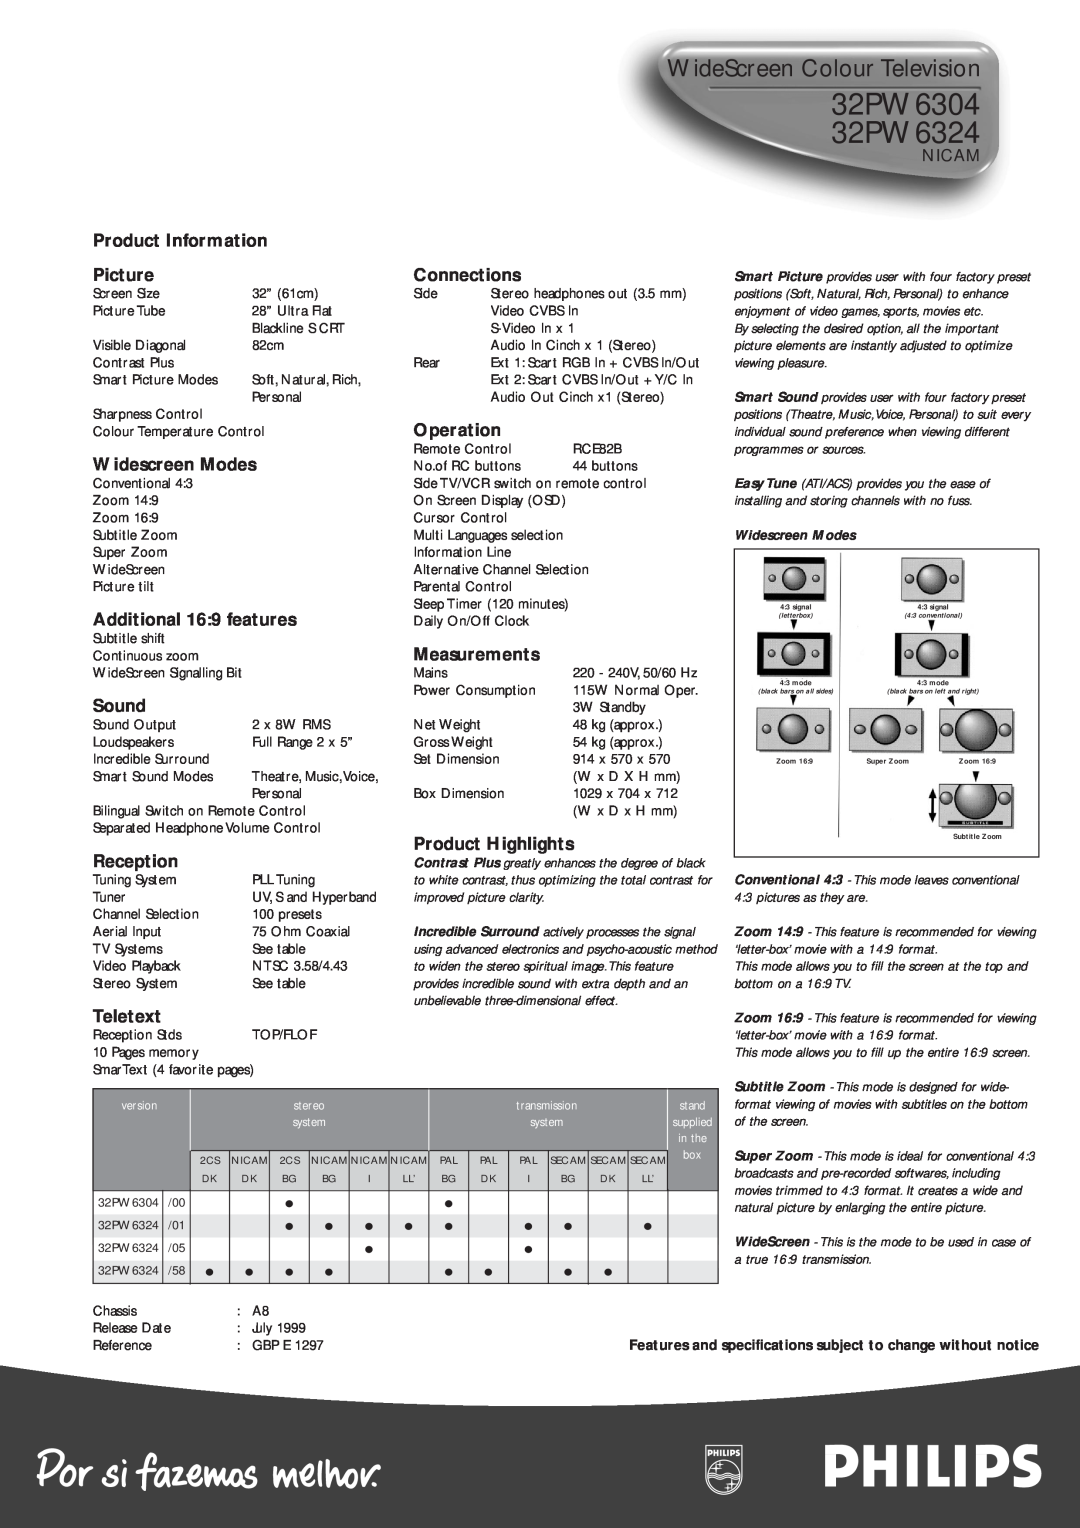 Philips manual 32PW6304 32PW6324, WideScreen Colour Television, Nicam, Reception, Connections, Operation, Measurements 